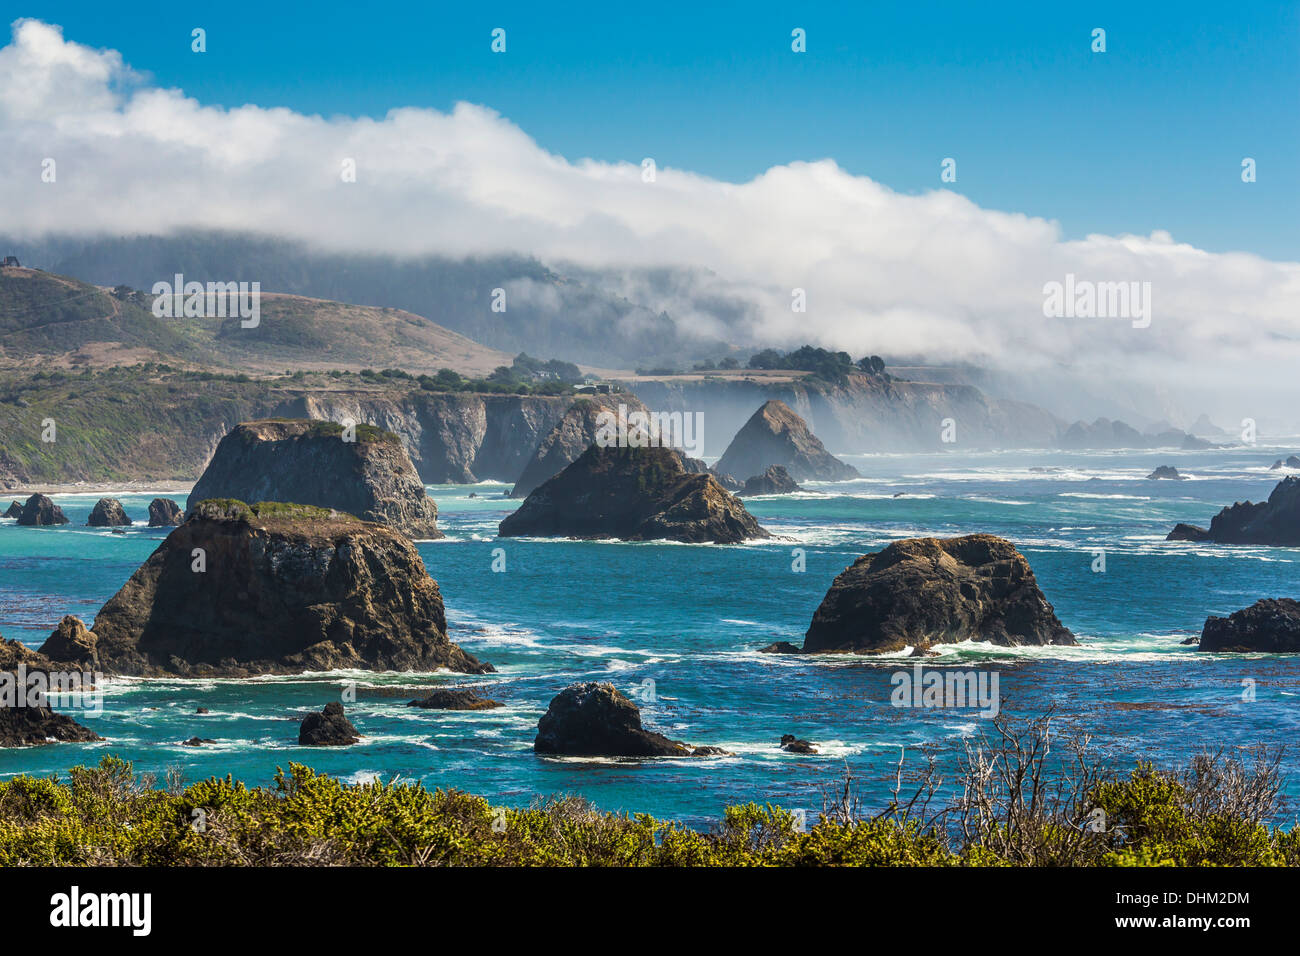 The sea stacks of Cuffey's Cove, a classic view in Mendocino County of the Pacific Coast, viewed from SR 1, California, USA Stock Photo